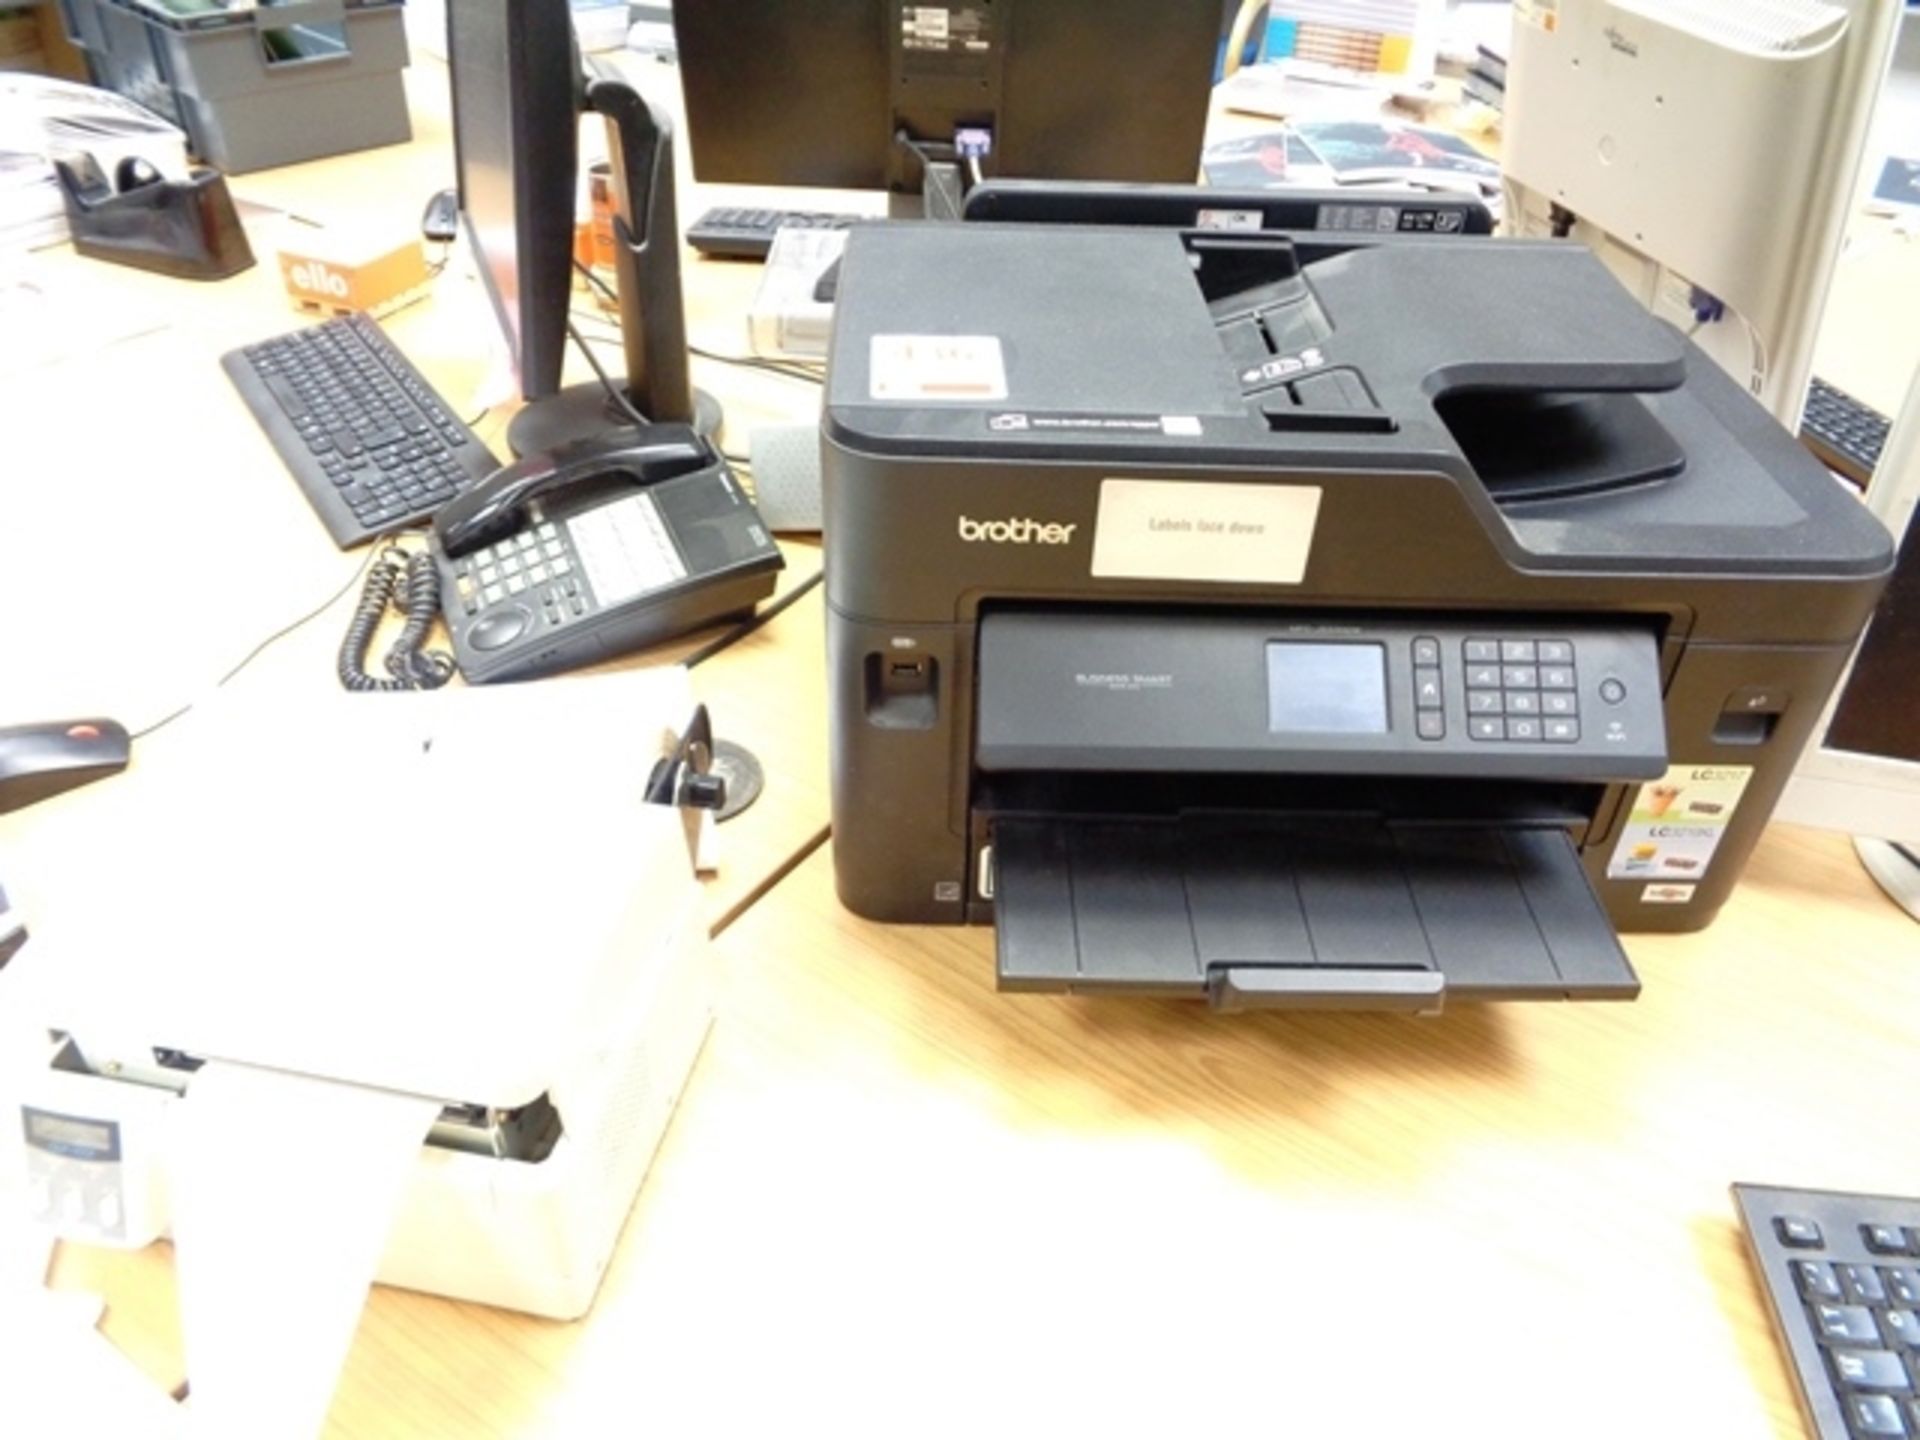 Brother MFC J5330DW Business Smart series printer, and a Citizen-1001 label printer, model JE11-M01,